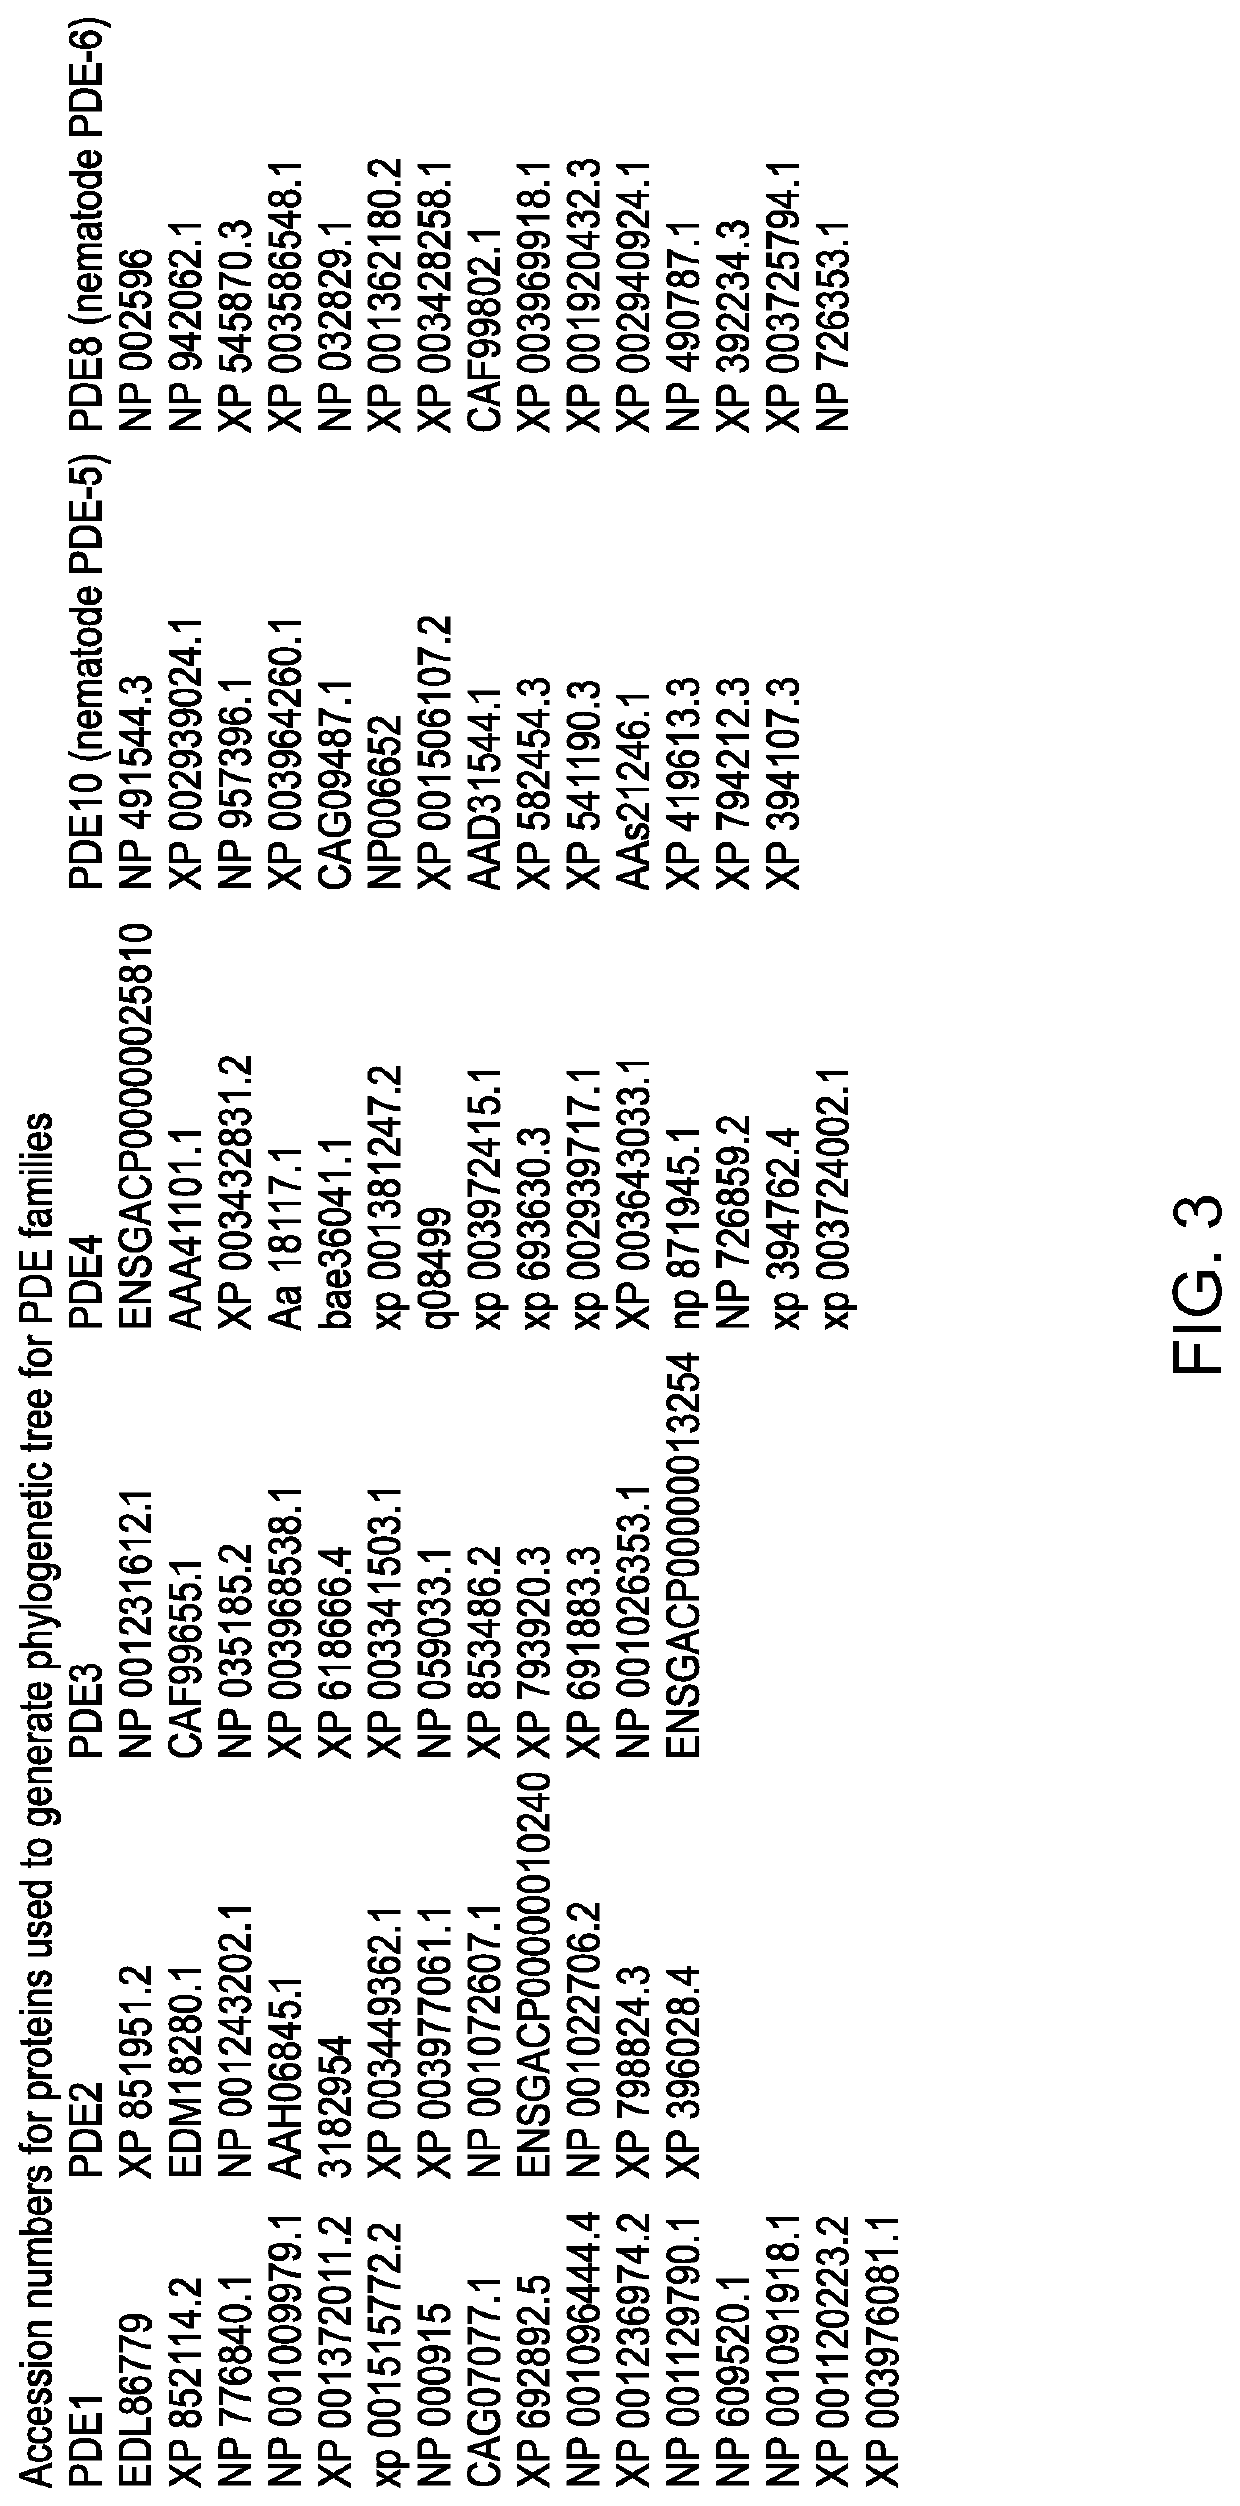 Methods of identification and use of nematicide compounds